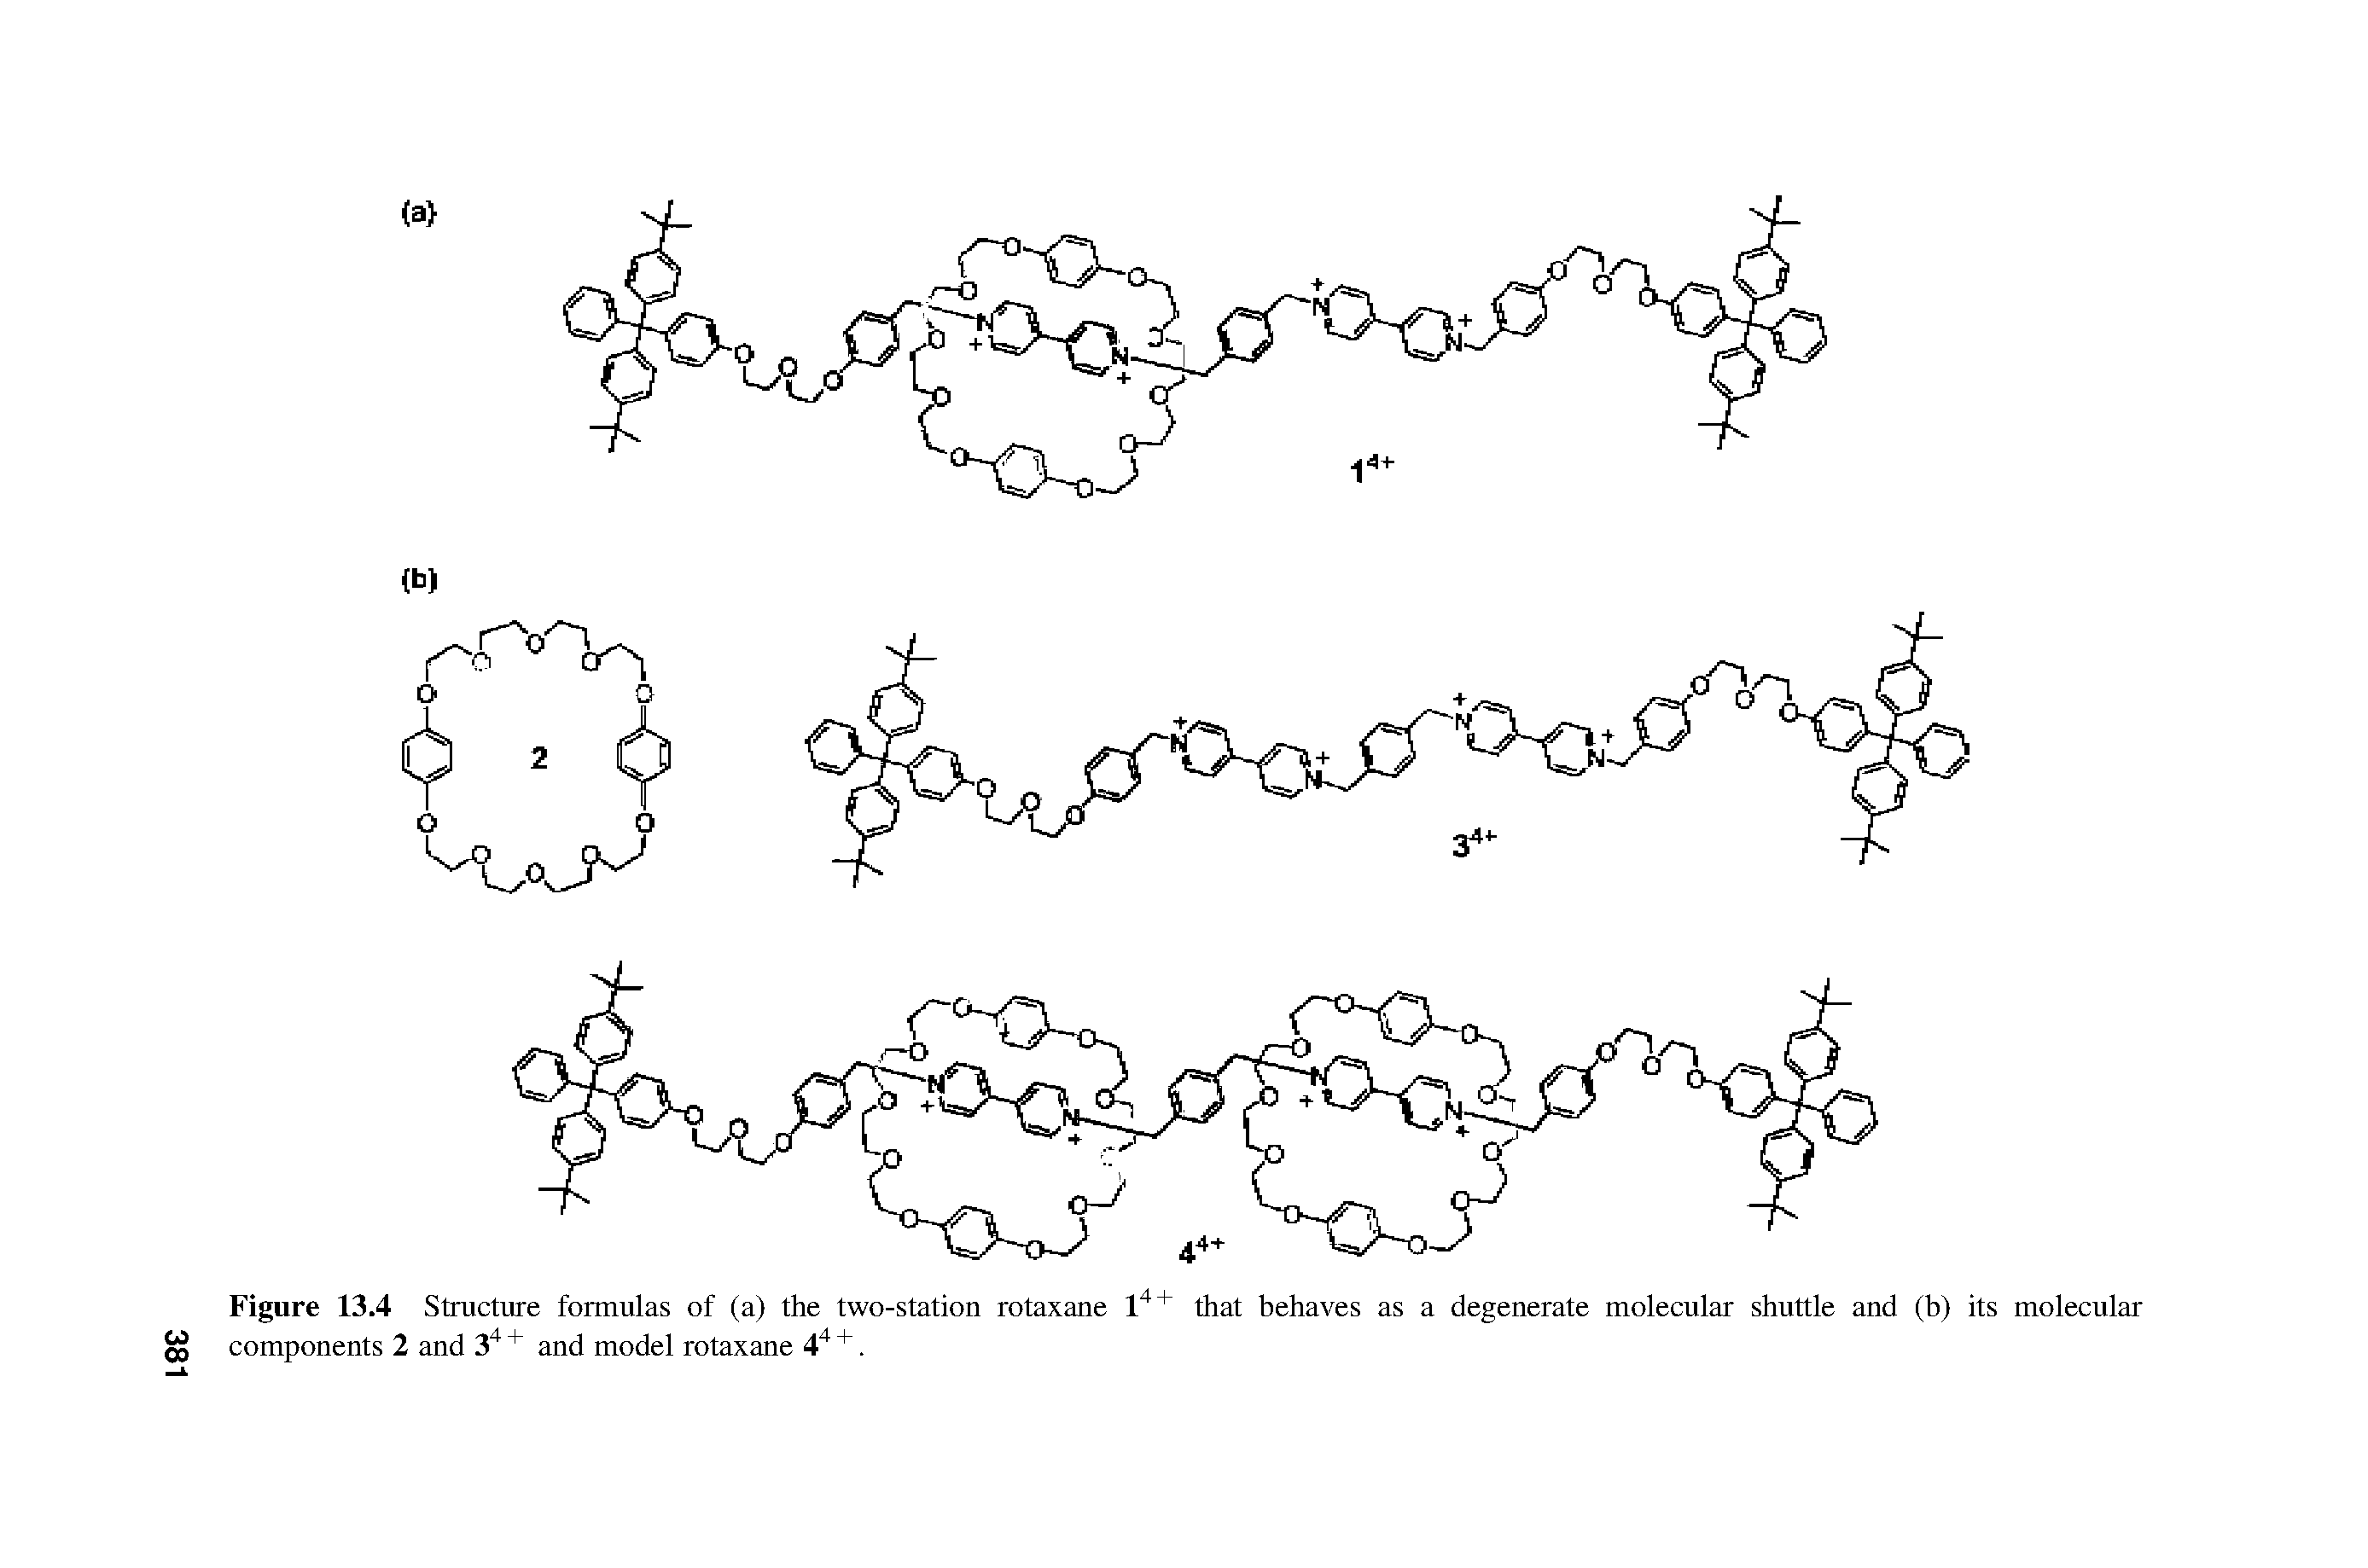 Figure 13.4 Structure formulas of (a) the two-station rotaxane 14+ that behaves as a degenerate molecular shuttle and (b) its molecular components 2 and 34 + and model rotaxane 44 +.